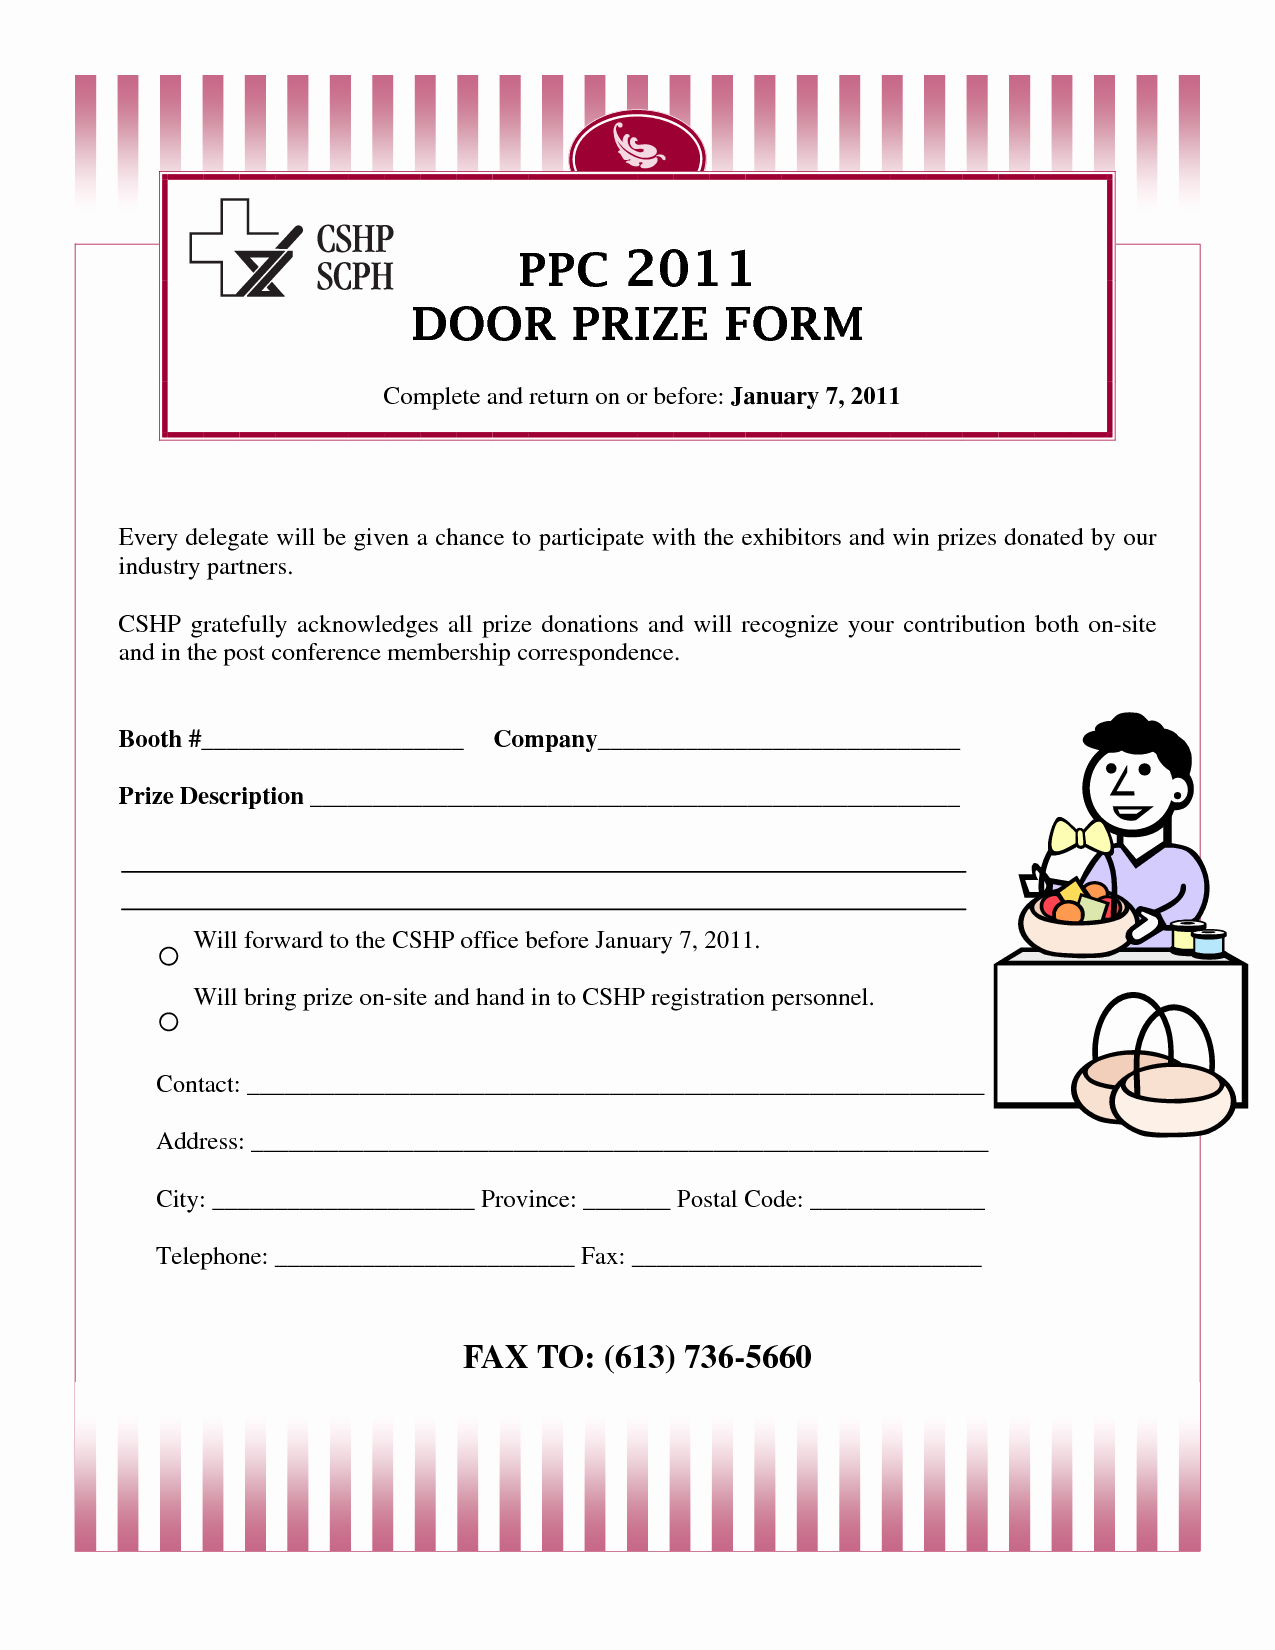 Drawing Entry form Template Word Elegant Draw Entry form Template Etame Mibawa